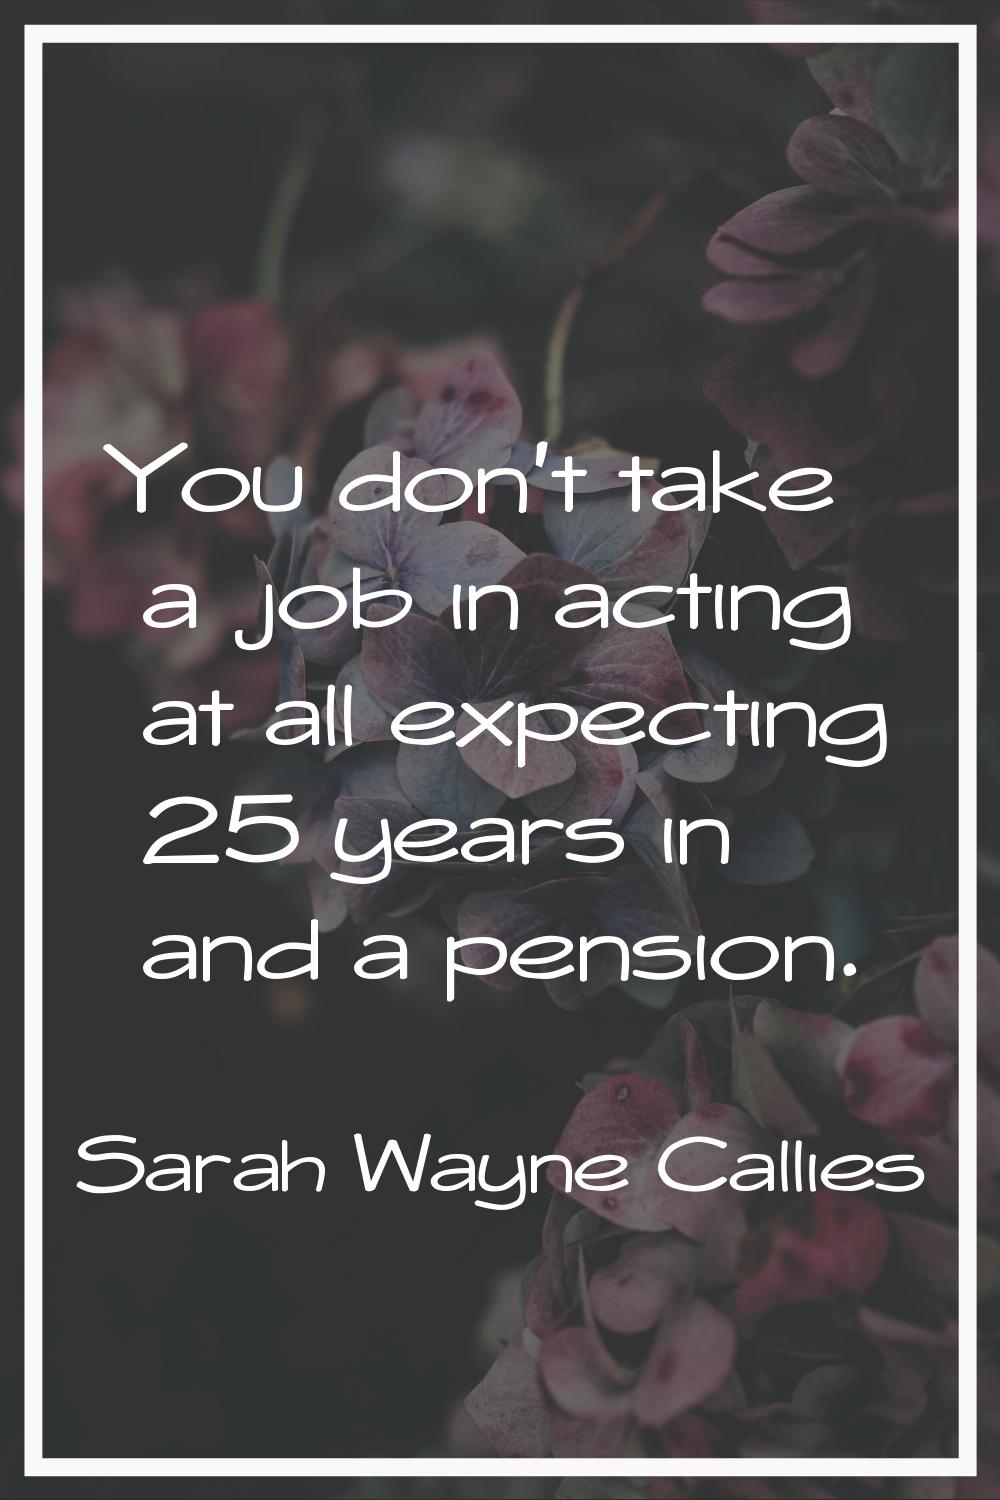 You don't take a job in acting at all expecting 25 years in and a pension.